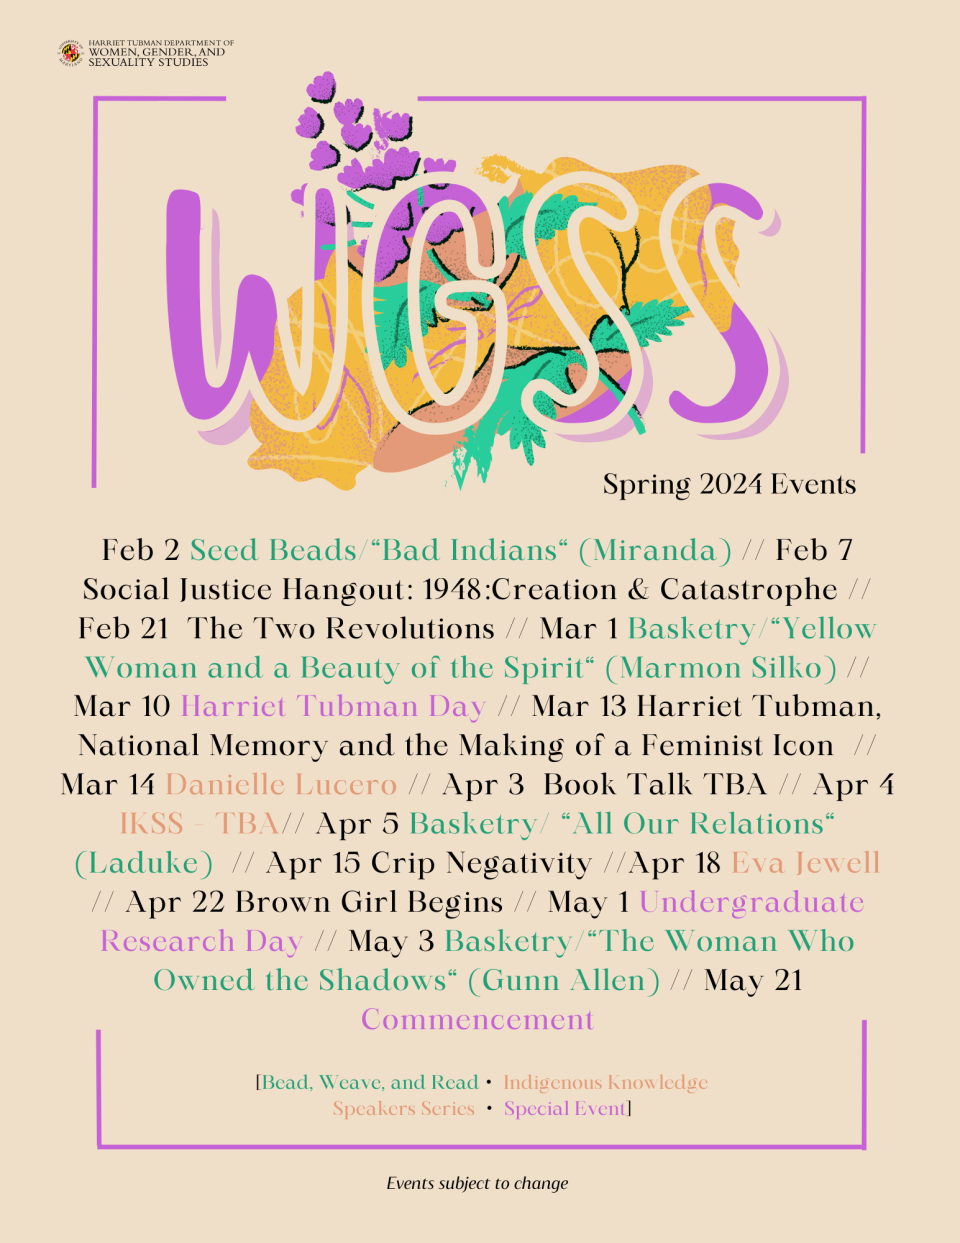 A list of upcoming events beneath a decorative image of the WGSS acronym